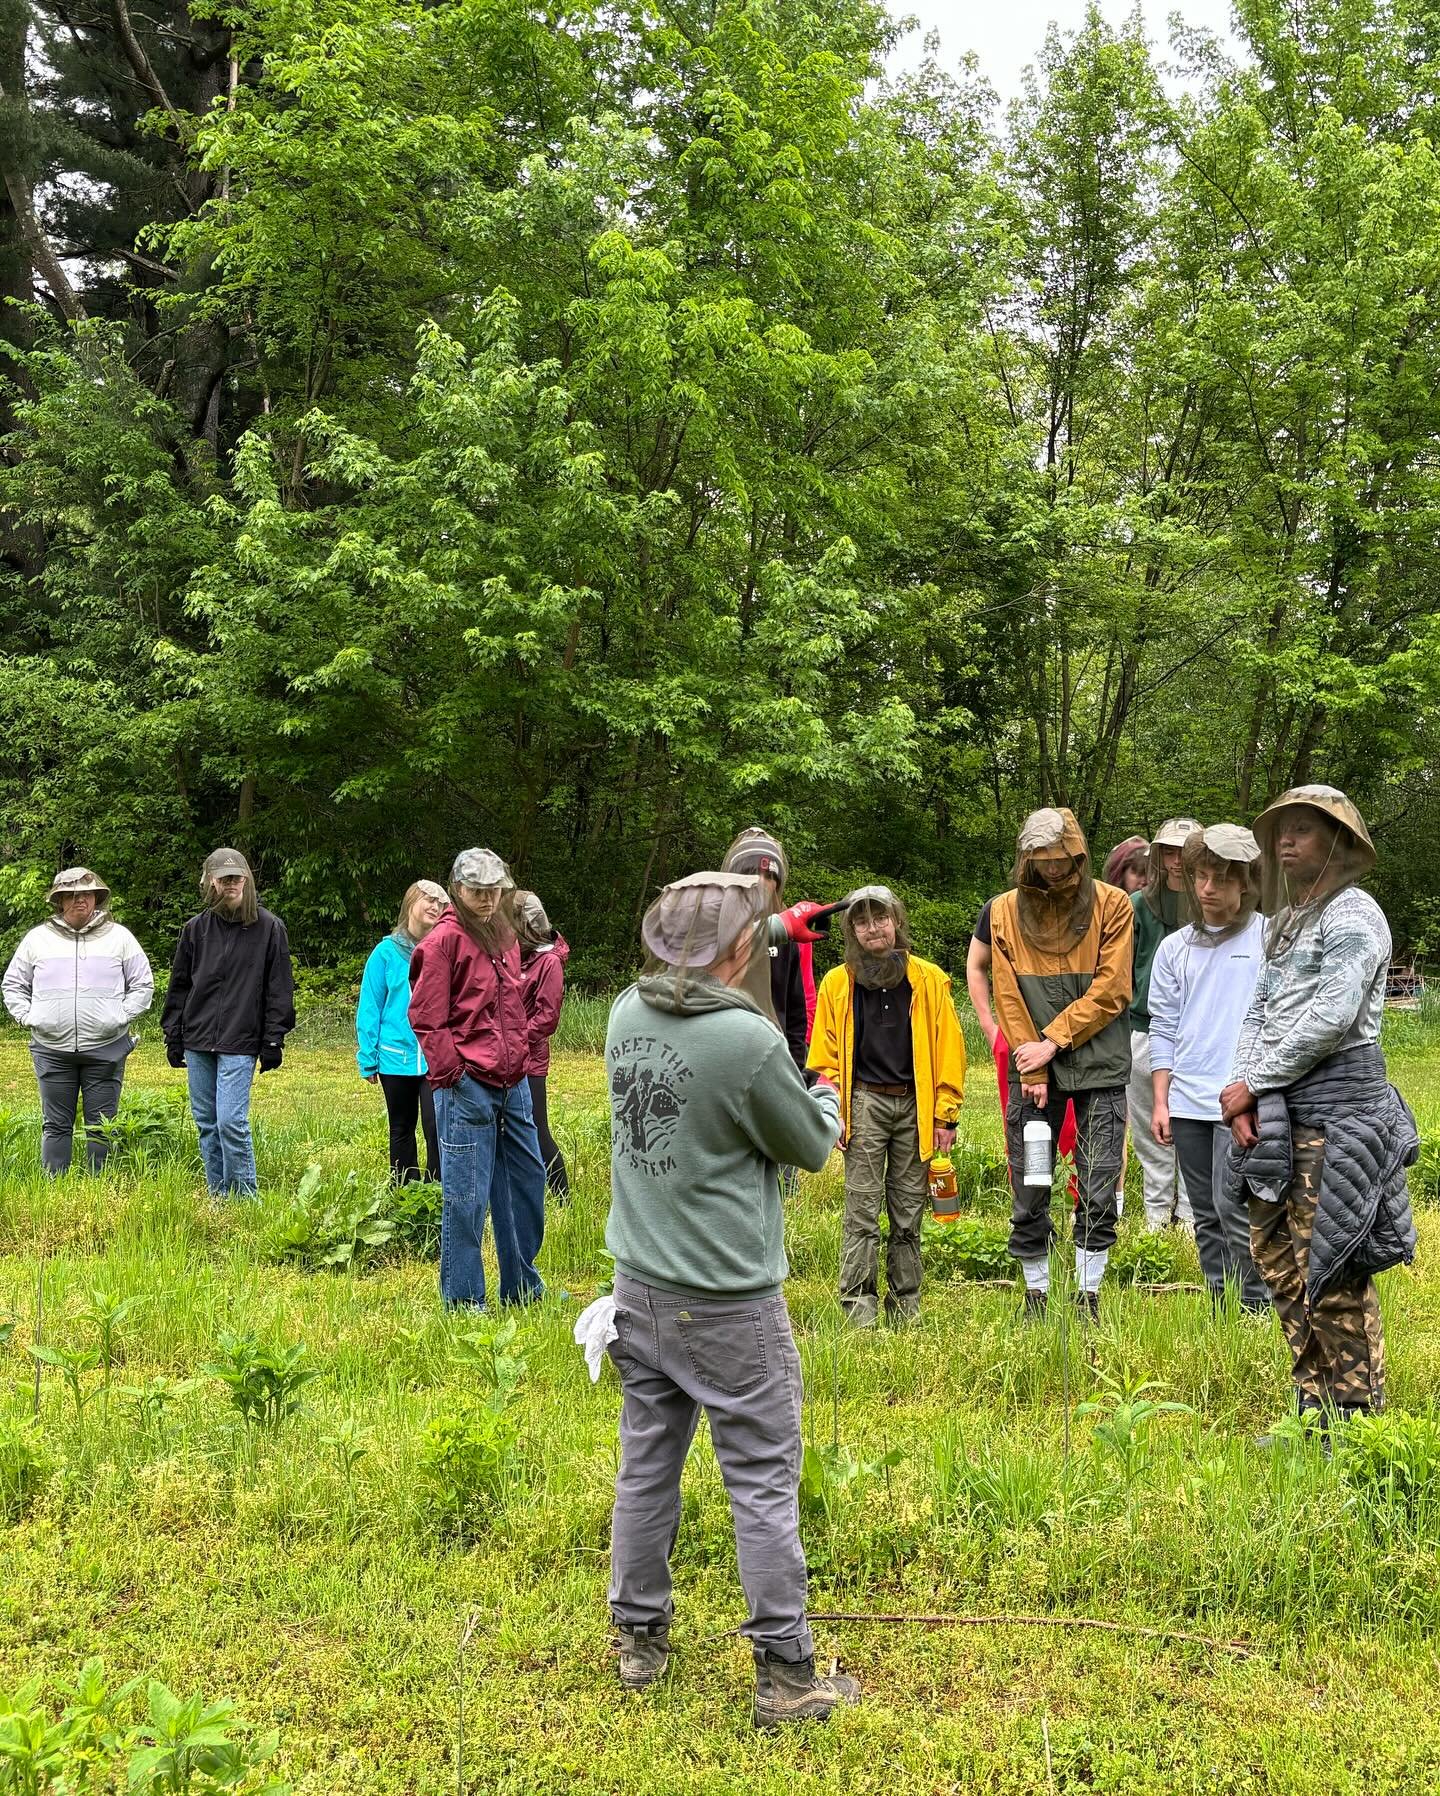 Last week we braved the rain and hosted a group of @hawkenschool students for a day of service. They helped with weeding, transplanting sprouted seedlings, and preparing @spice_acres_farm for summer events. As a bonus, we were able to provide a taste